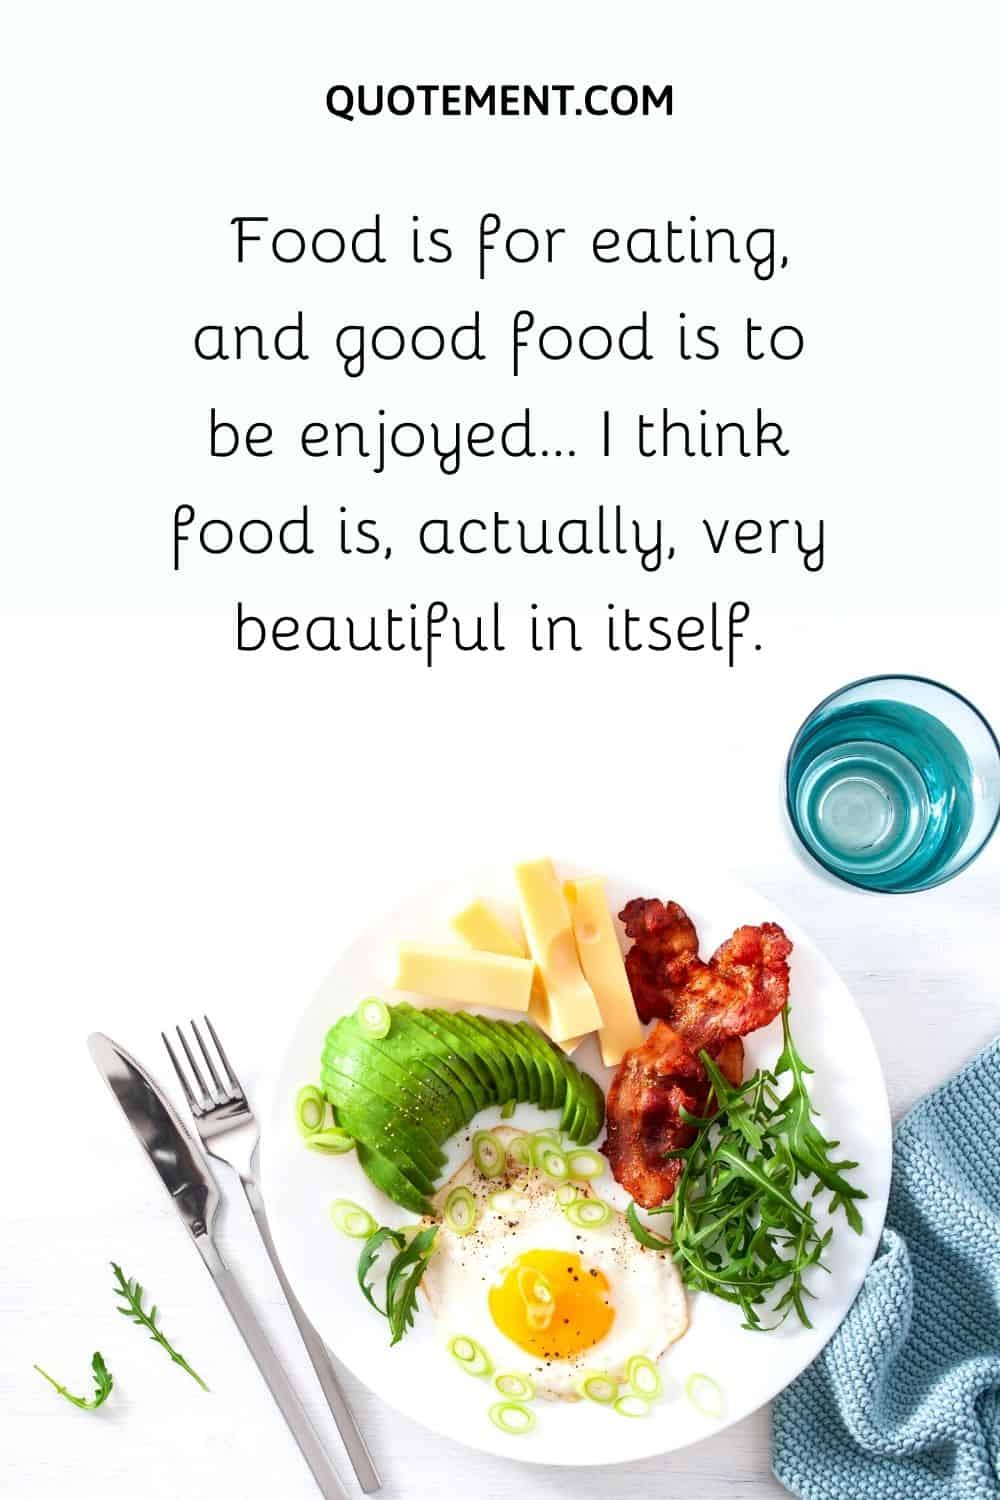 Food is for eating, and good food is to be enjoyed… I think food is, actually, very beautiful in itself.